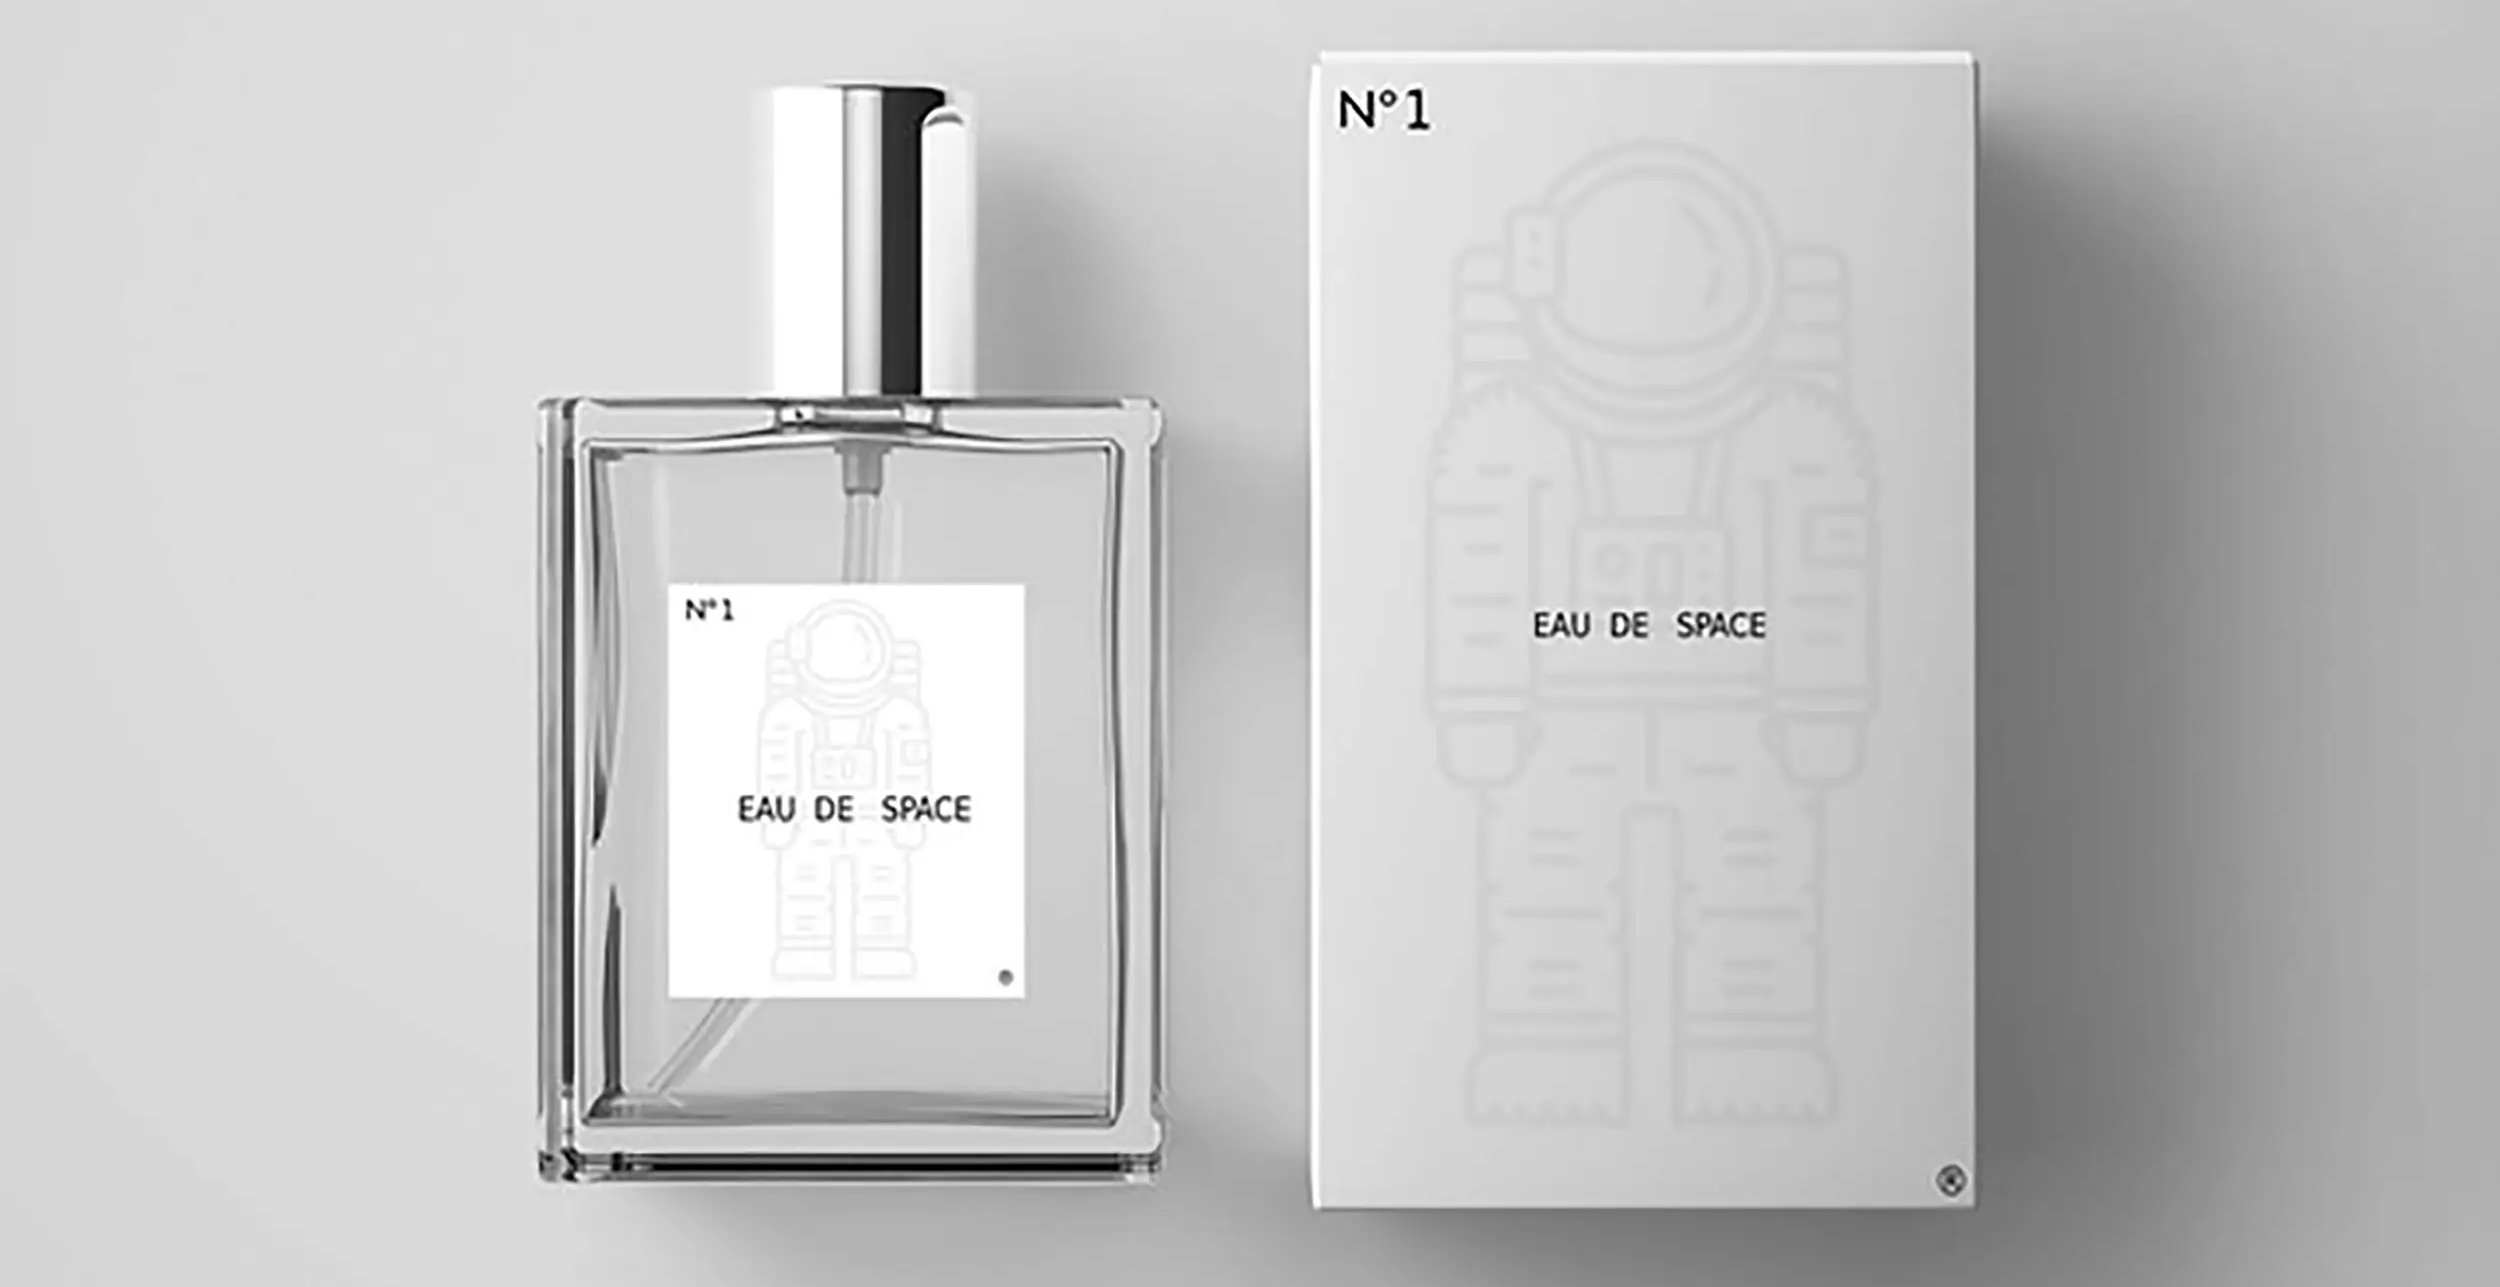 This Perfume Smells Exactly Like Space, Allegedly